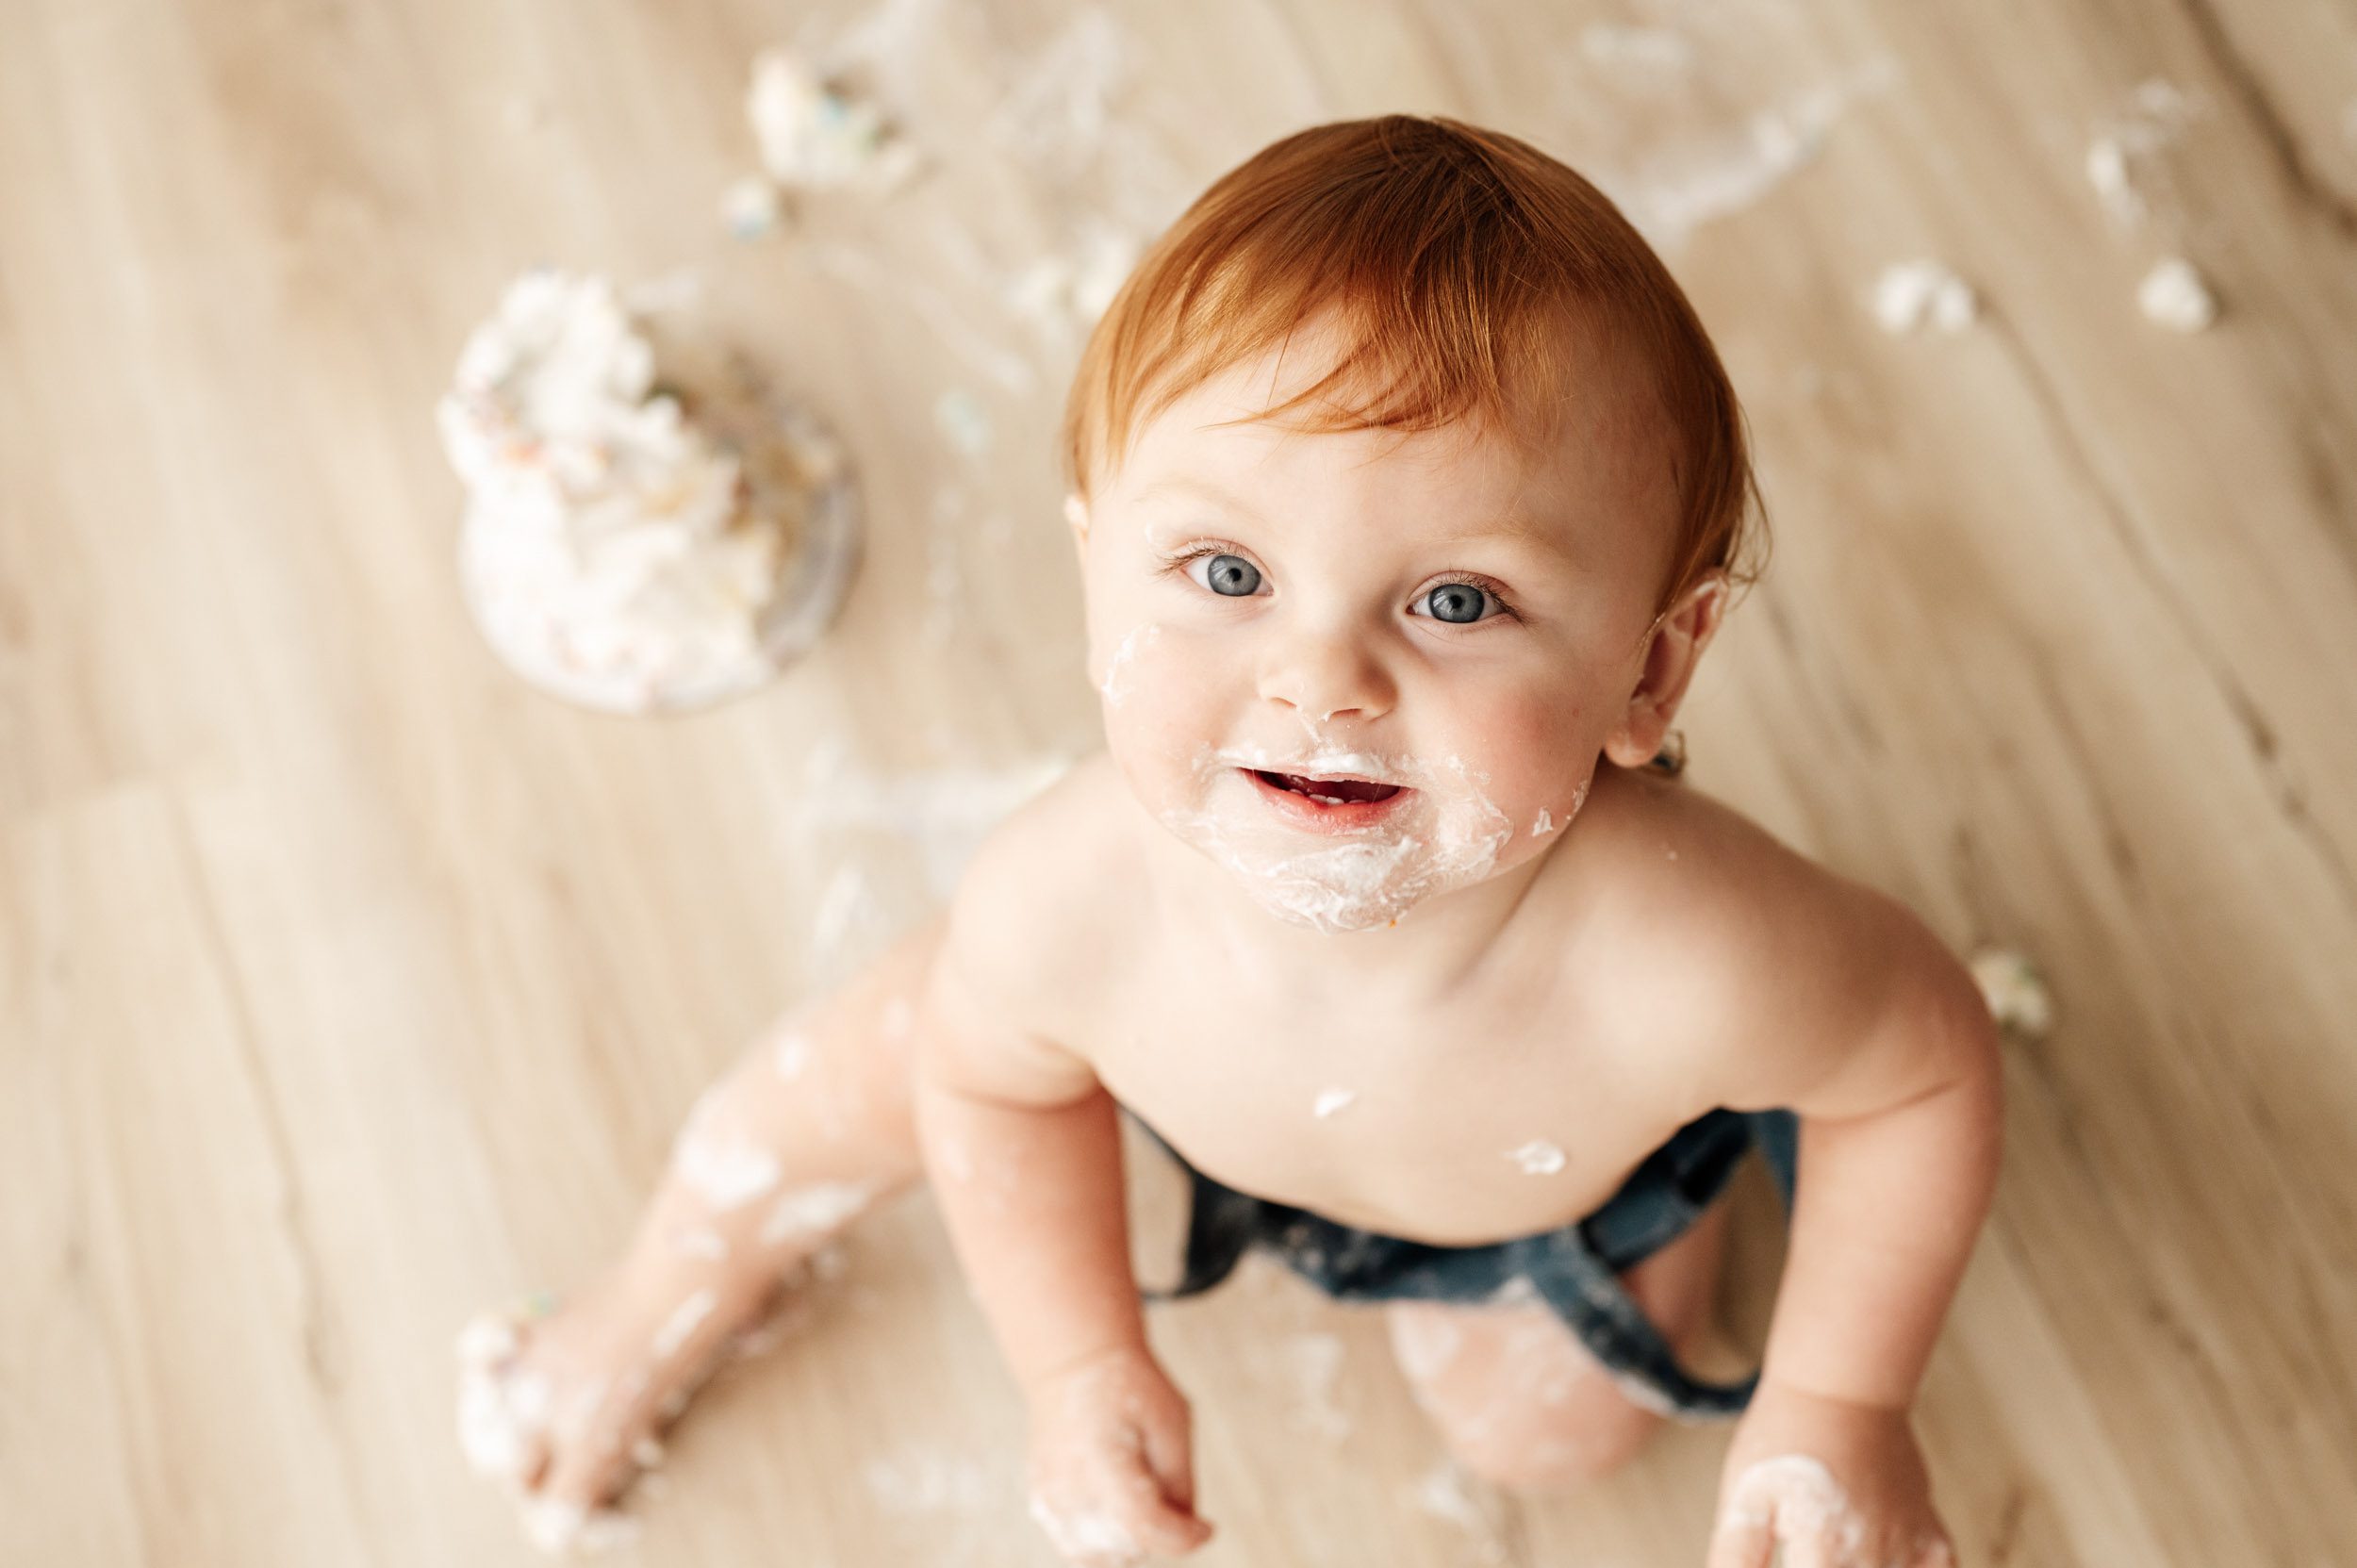 a picture taken from above of a boy with cake all over his face looking straight up at the camera and smiling during a 1st birthday cake smash photoshoot